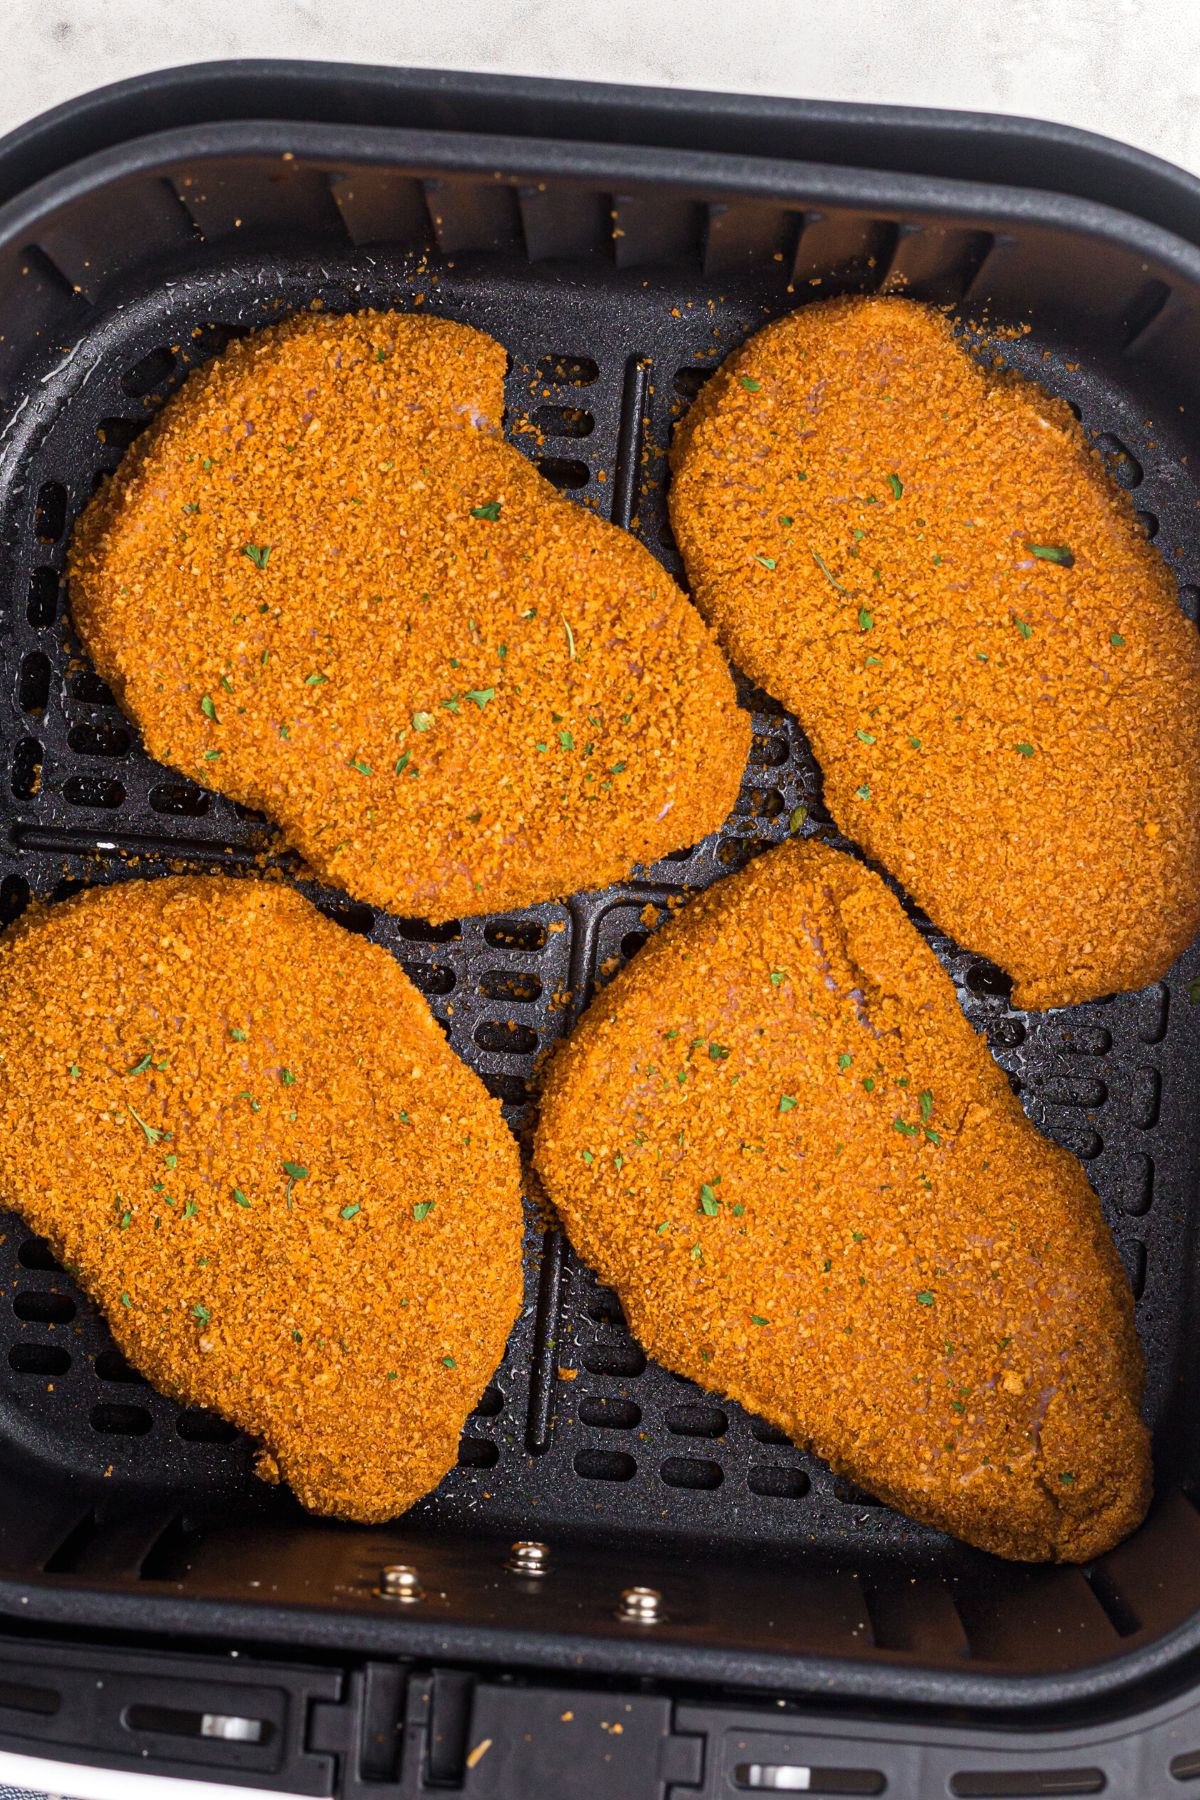 Uncooked coated pork chops in the air fryer basket